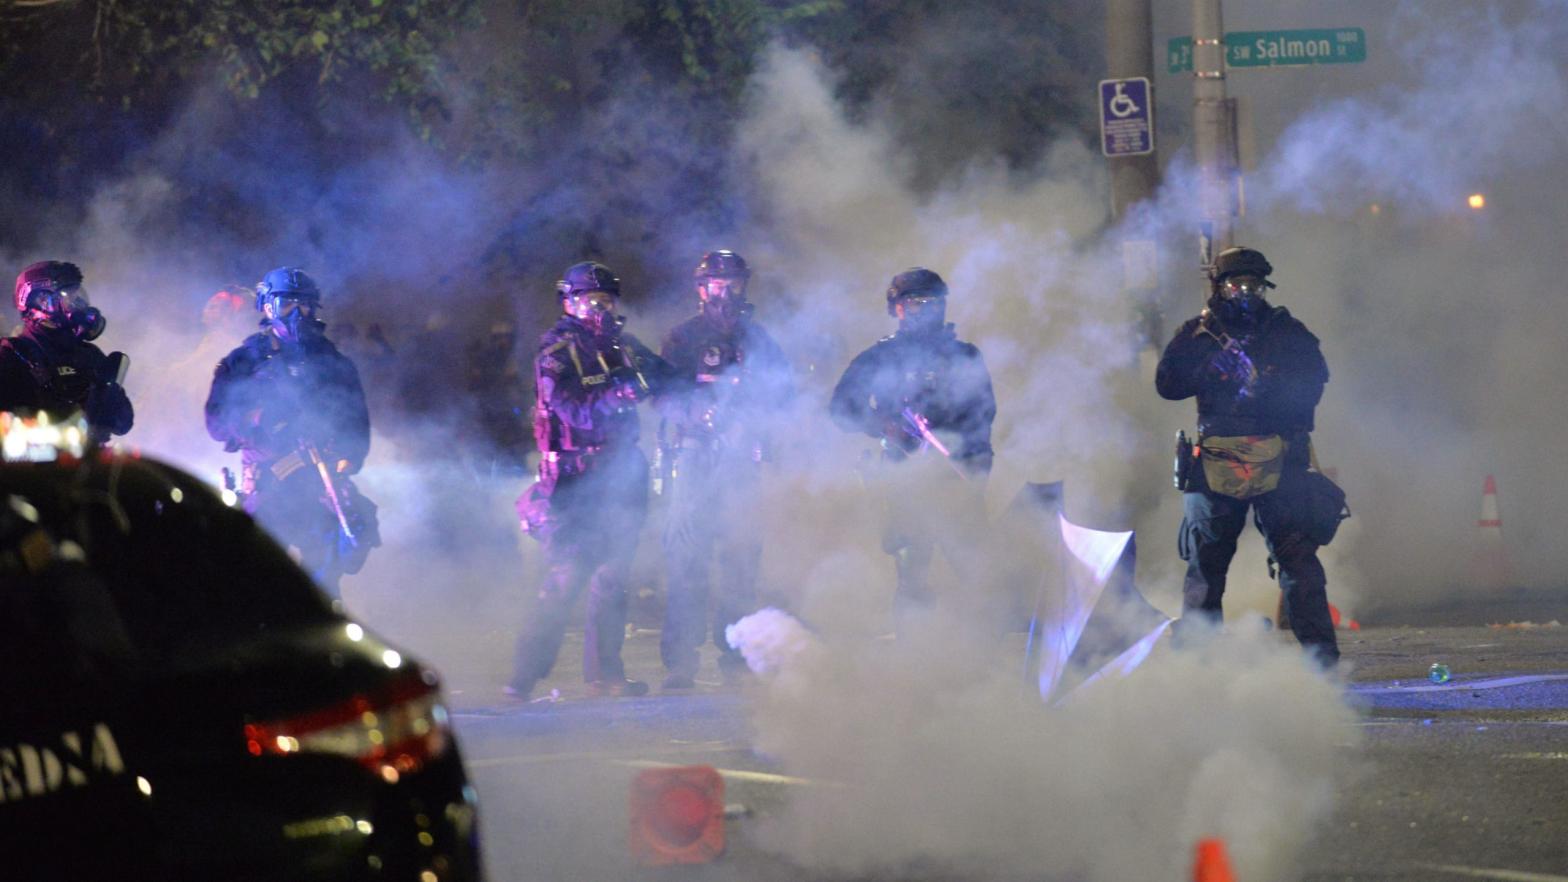 A cloud of tear gas deployed against protestors in Portland, Oregon on July 26, 2020. (Photo:  Ankur Dholakia, Getty Images)